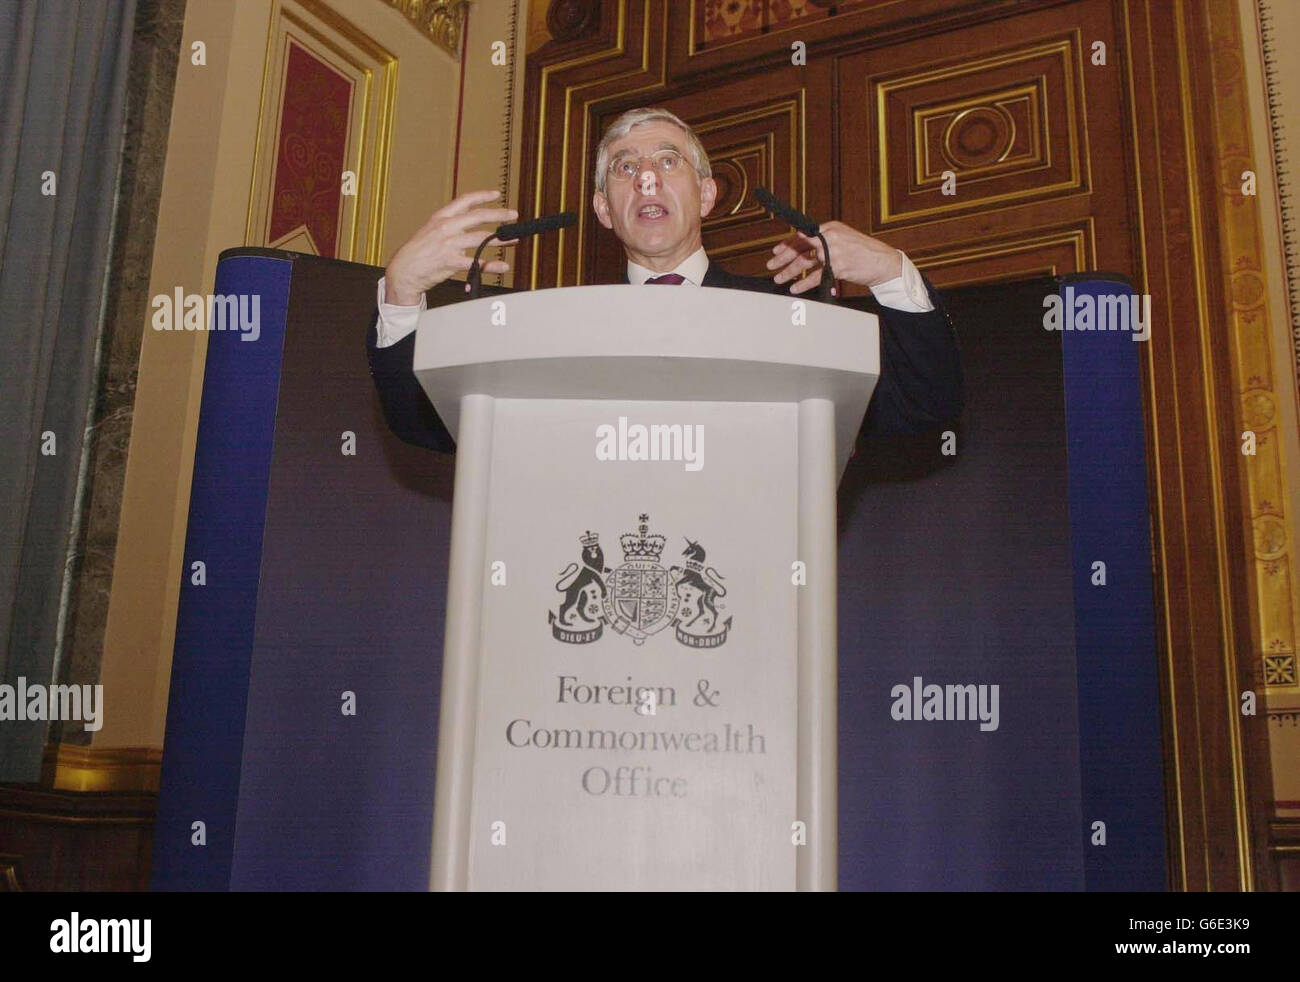 Foreign Secretary Jack Straw speaking at the Foreign Office in London's Whitehall, where he said that the proposed new constitution for the European Union will put power firmly in the hands of national governments, rather than transfer it to Brussels as critics have claimed. According to Mr Straw, the constitution makes clear for the first time that the nation state is the 'anchor of the Union' and the source of its democratic legitimacy. Stock Photo